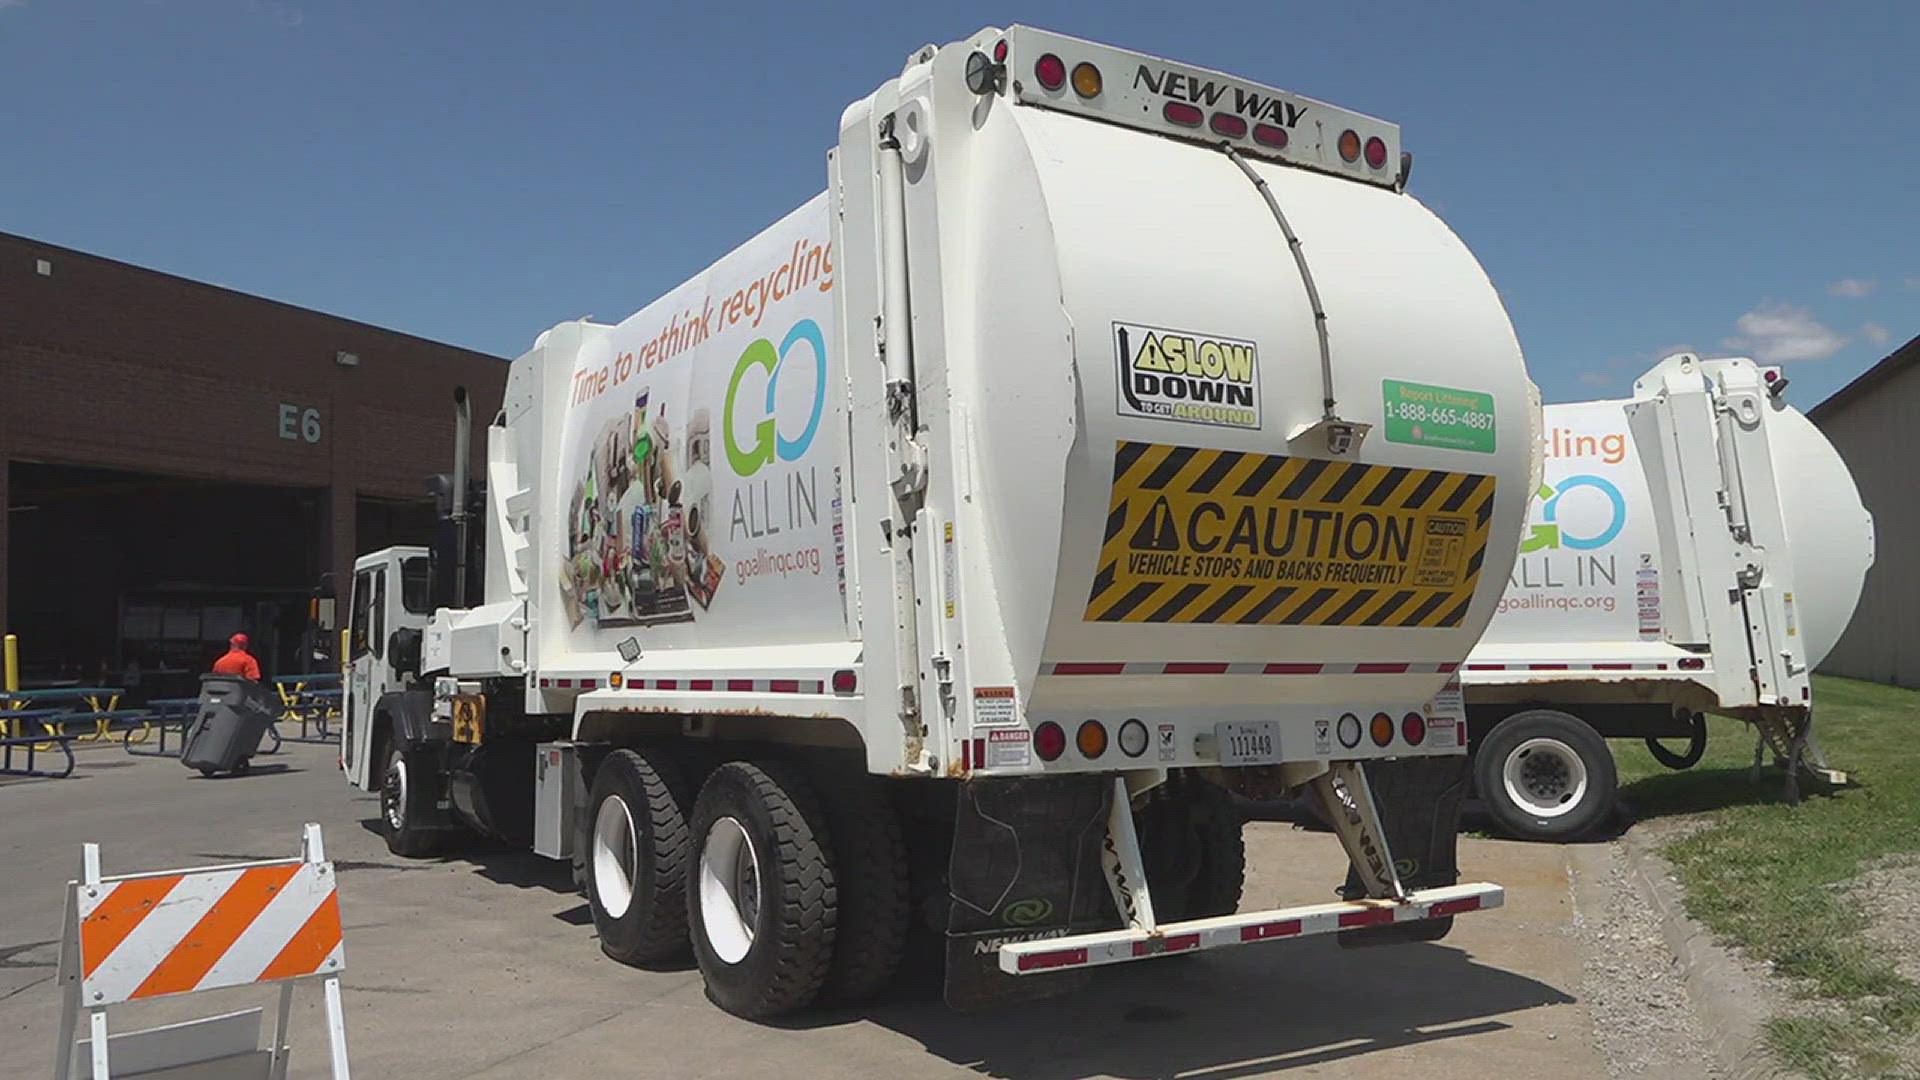 The City unveiled the names of three recycling trucks that community members submitted and voted on.